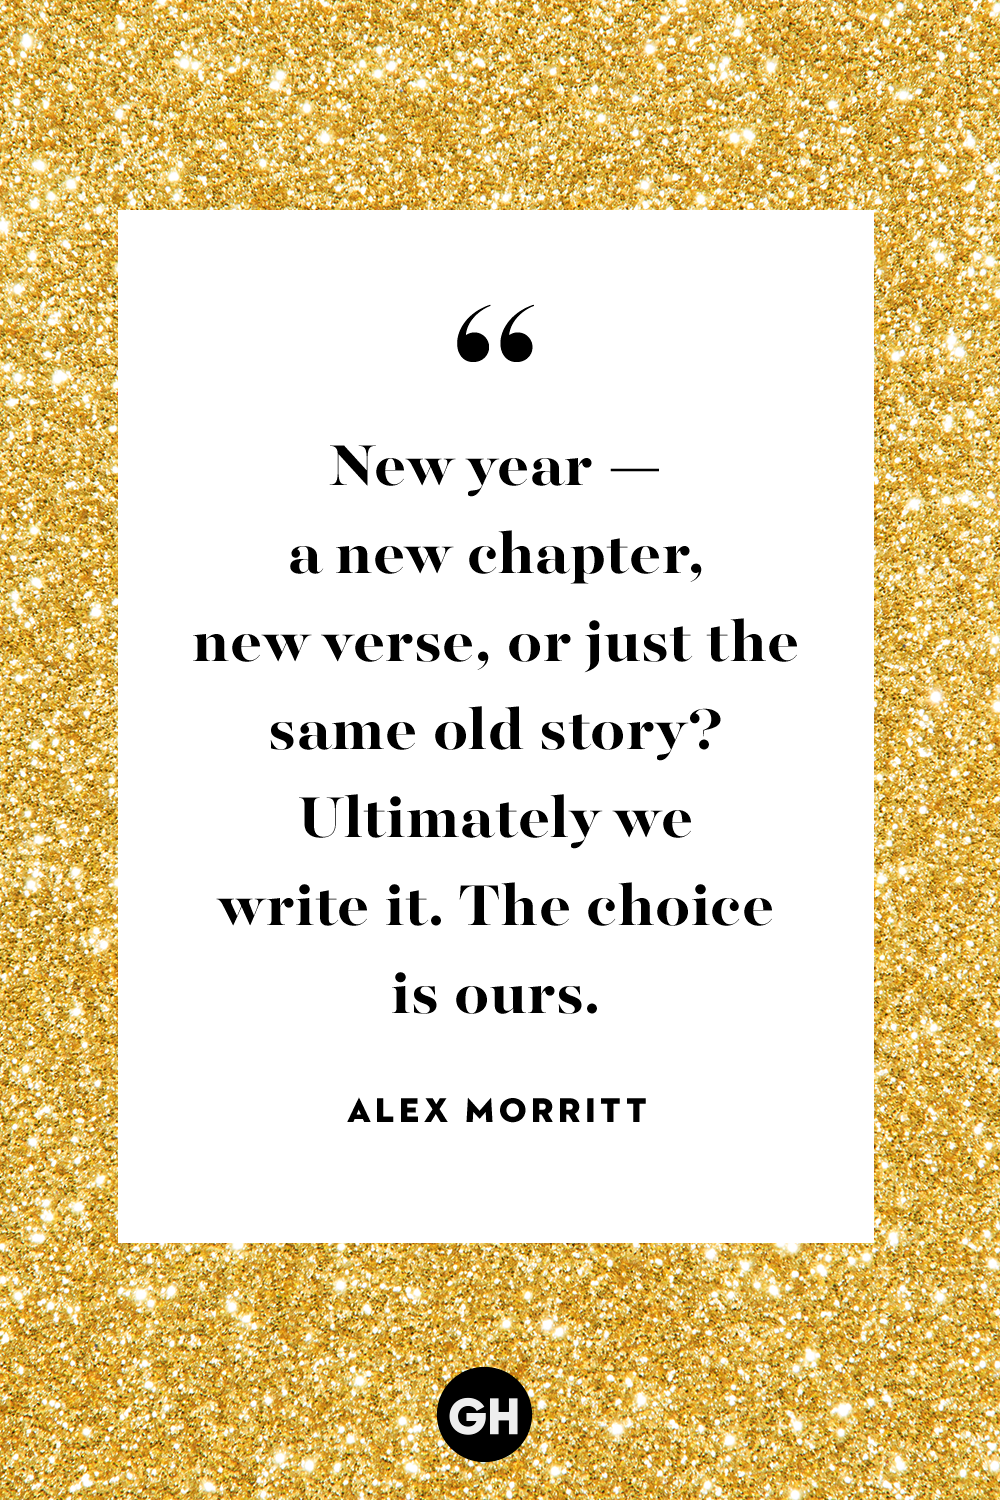 Inspirational New Year Quotes for Best Wishes - Quotes Muse